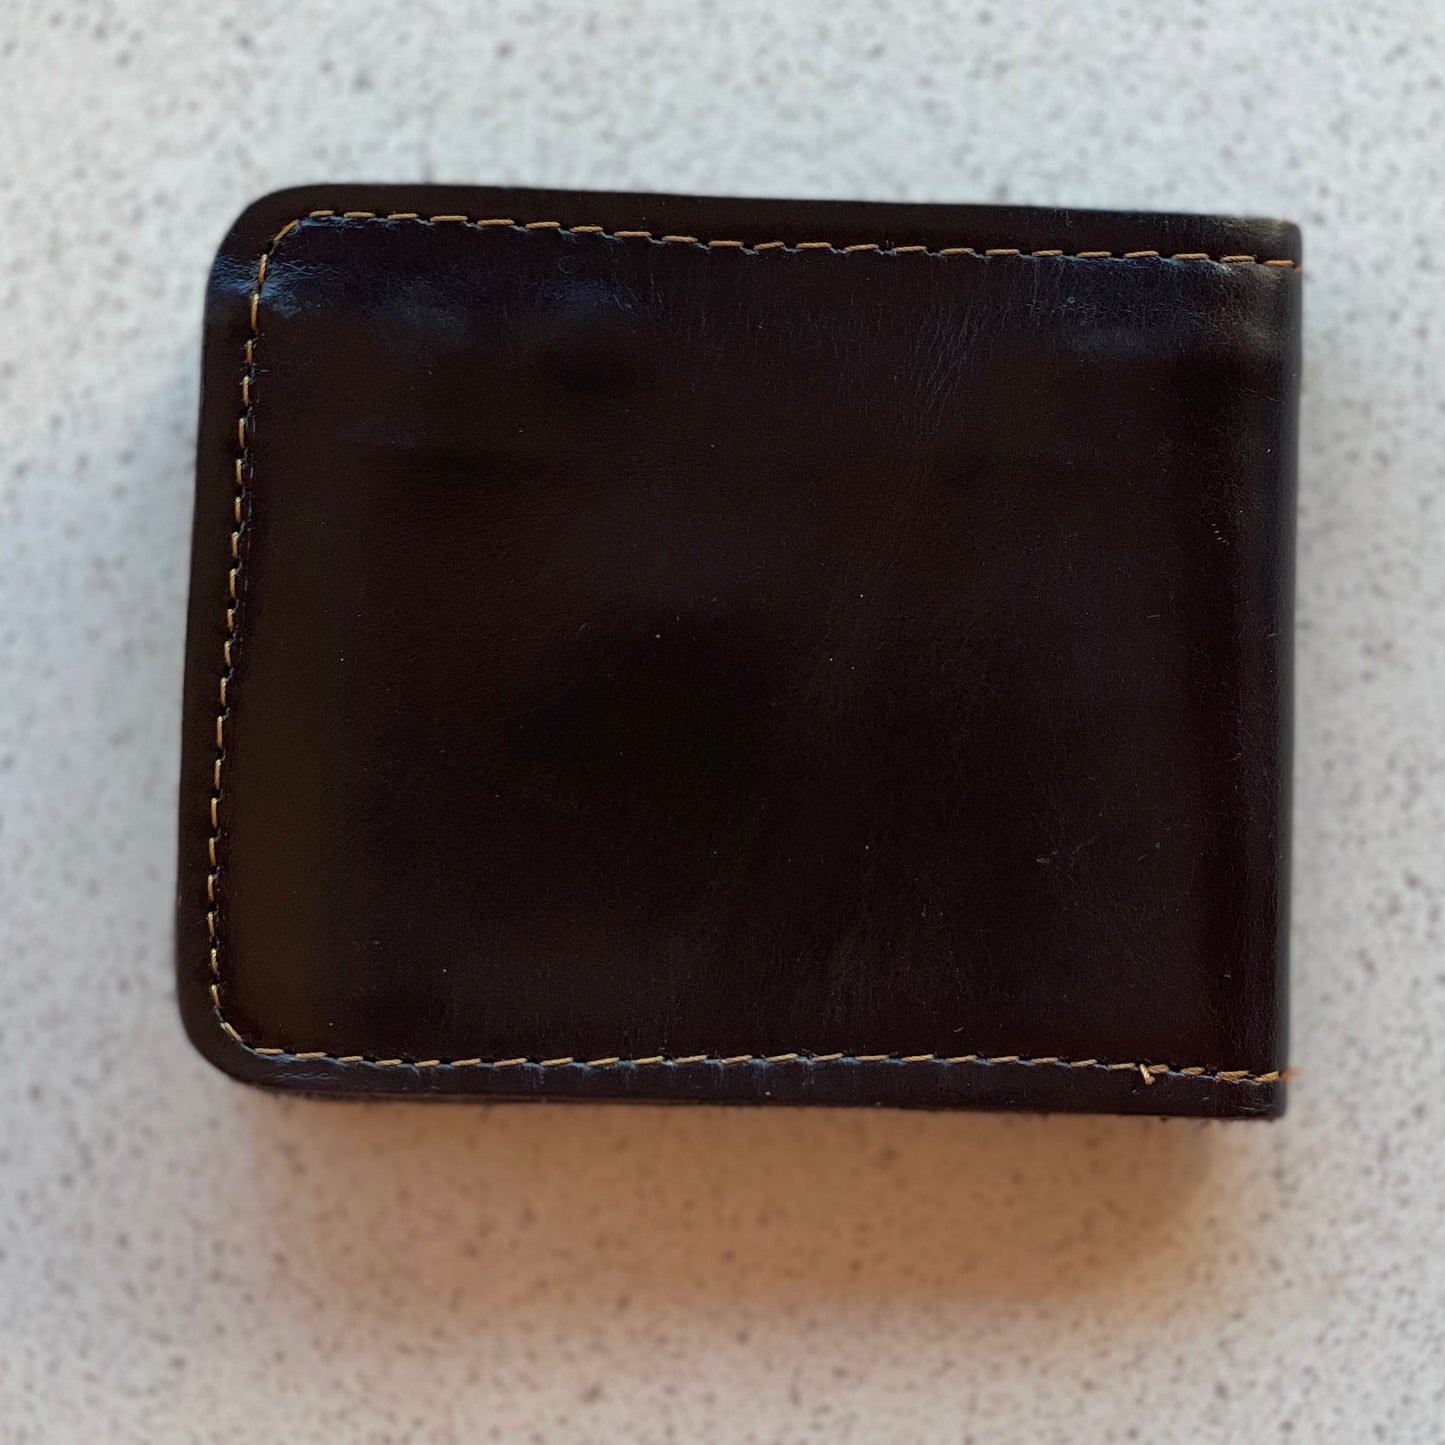 Hand Crafted Buffalo Leather Wallet - Brown